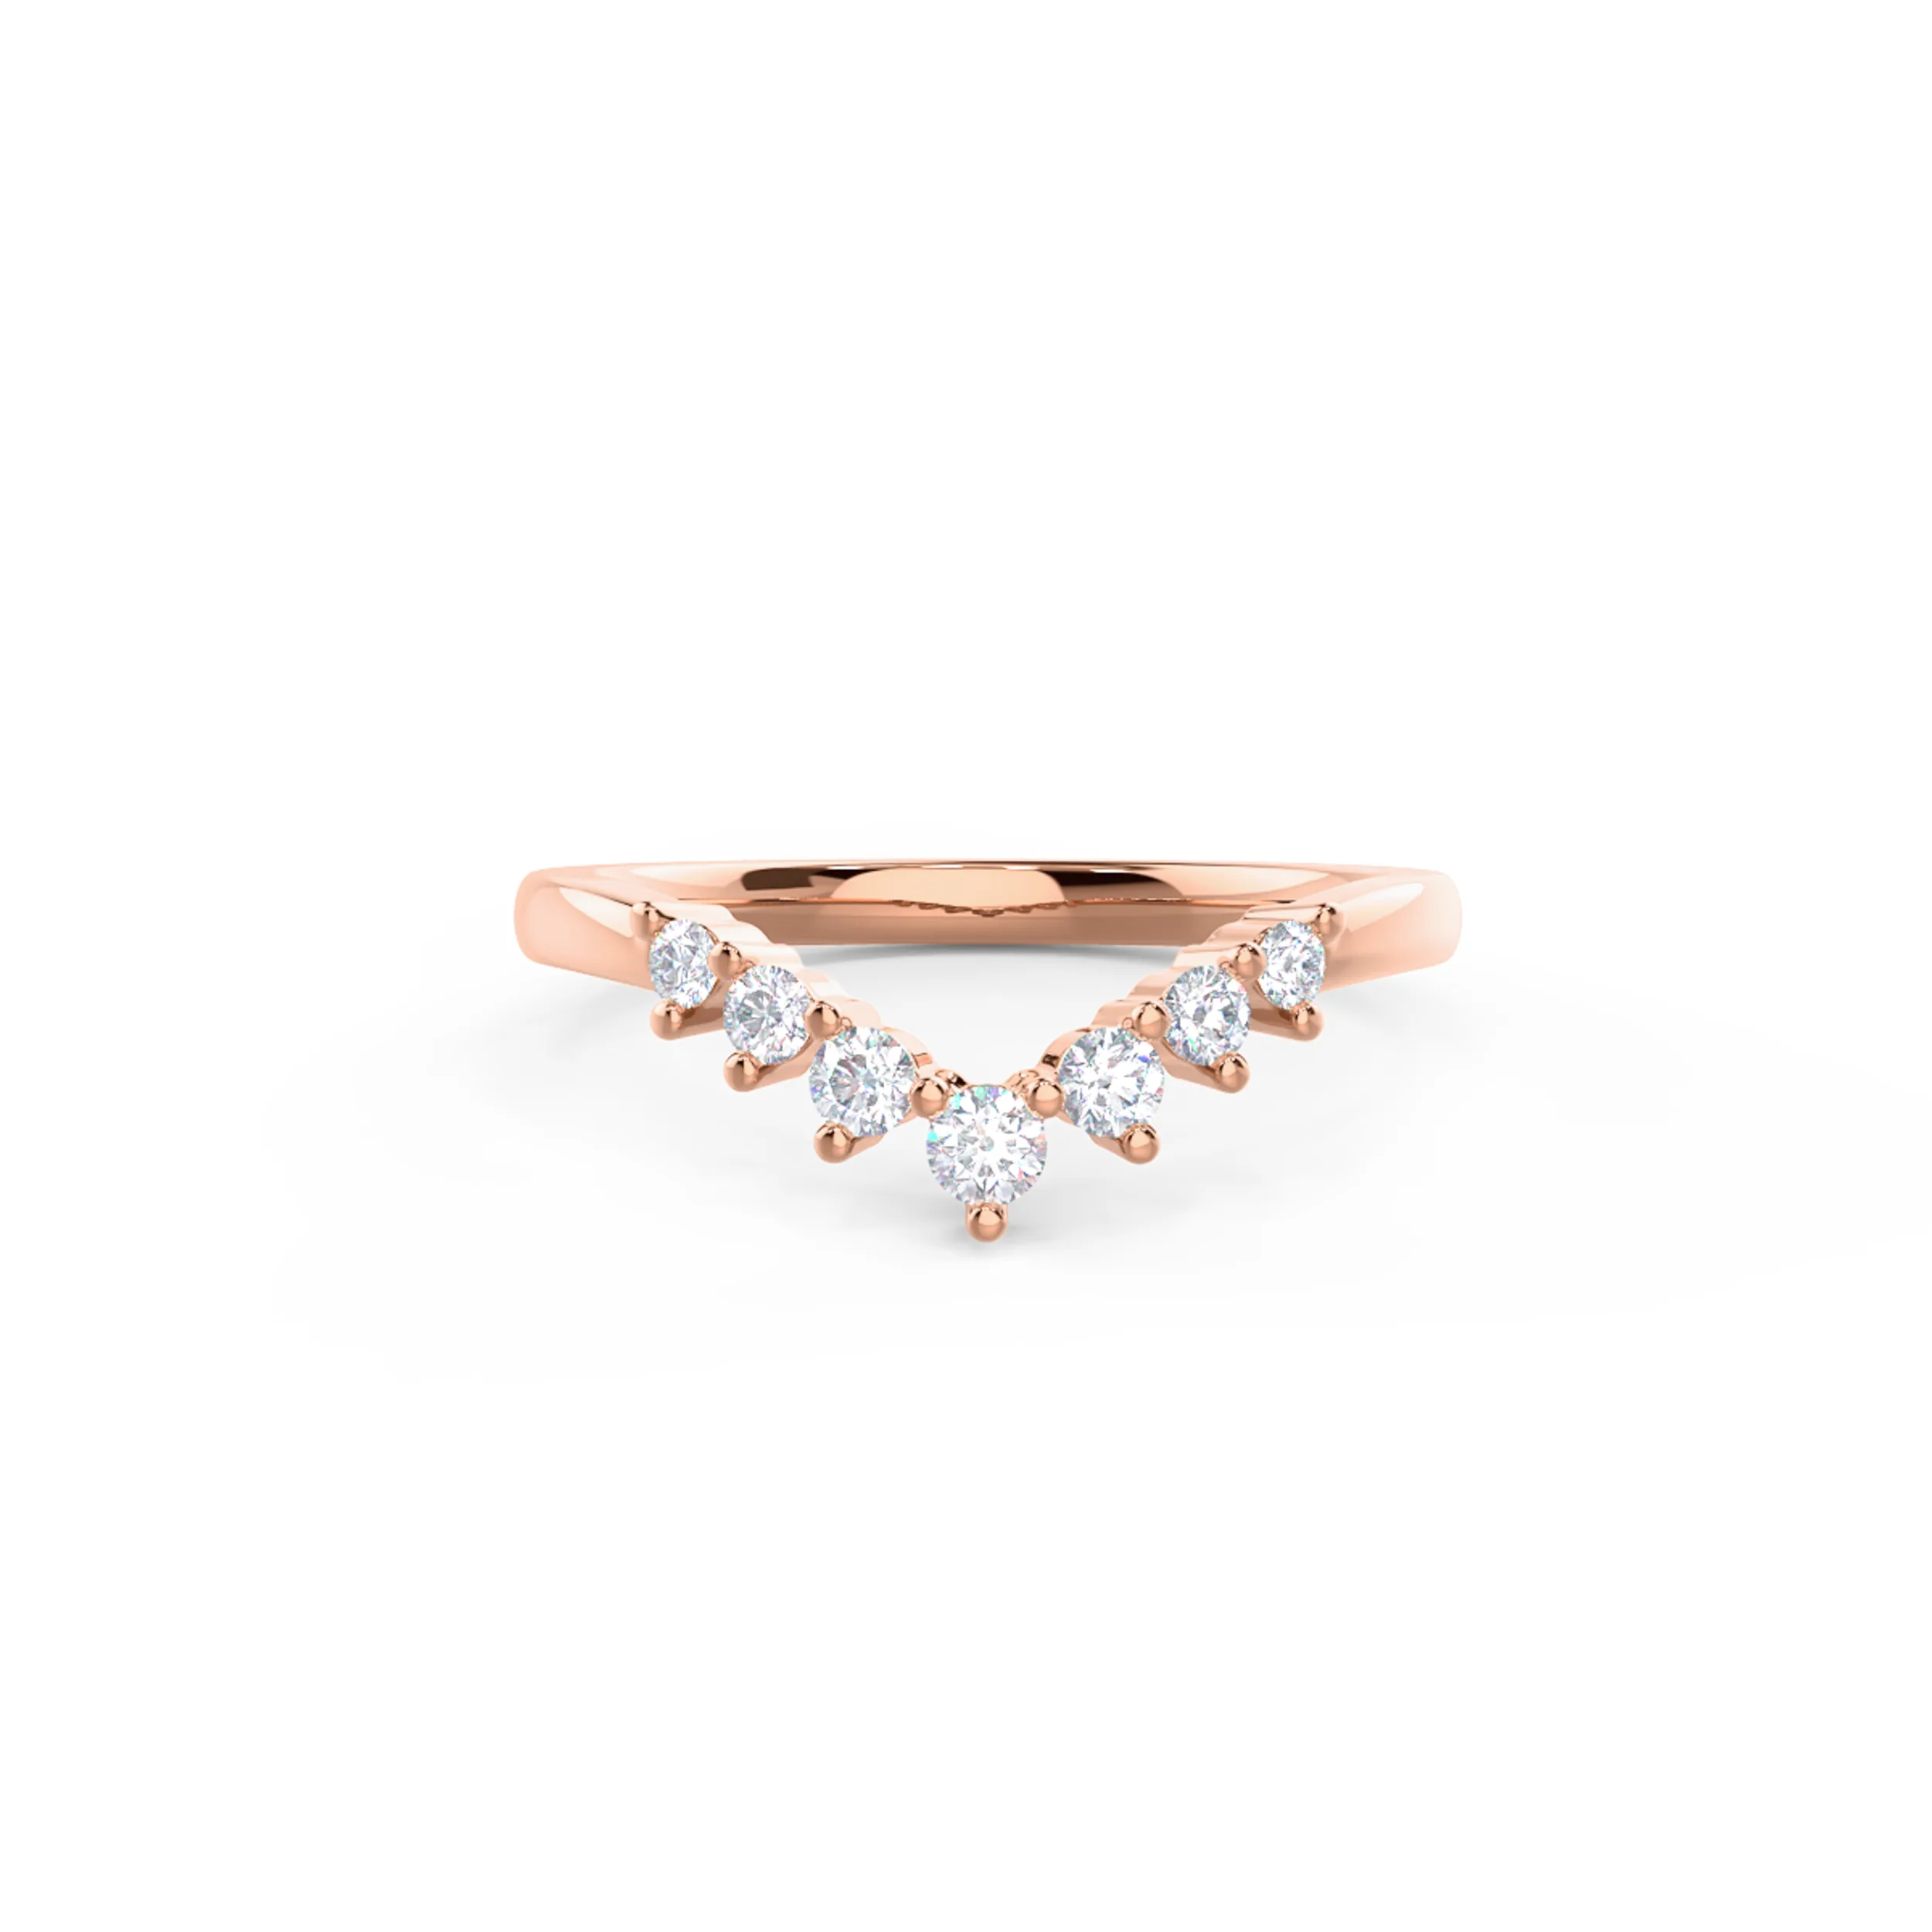 Exceptional Quality 0.45 Carat Round Diamonds Nesting Half Band in 14k Rose Gold (Main View)